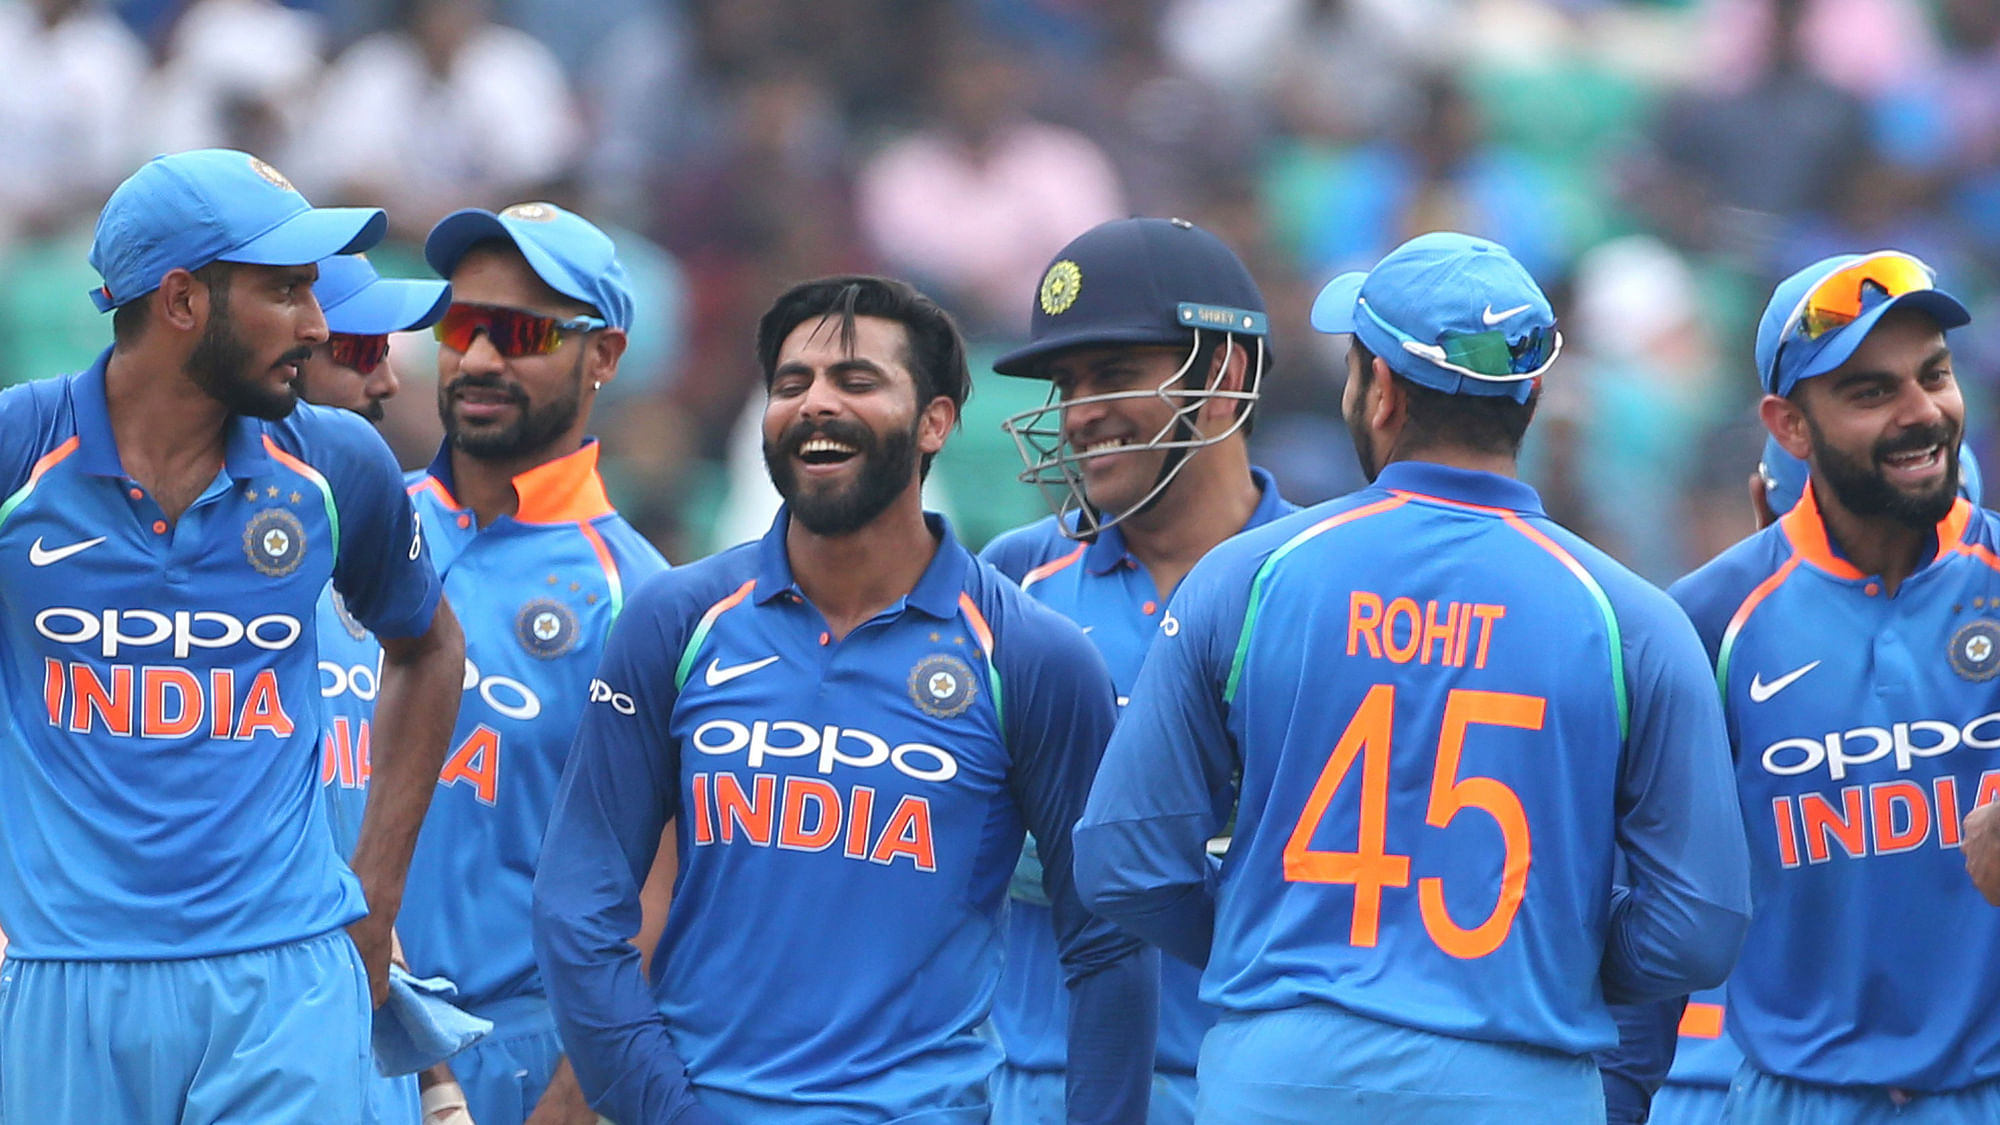 India beat West Indies by 9 wickets in the fifth ODI in Thiruvananthapuram on Thursday.